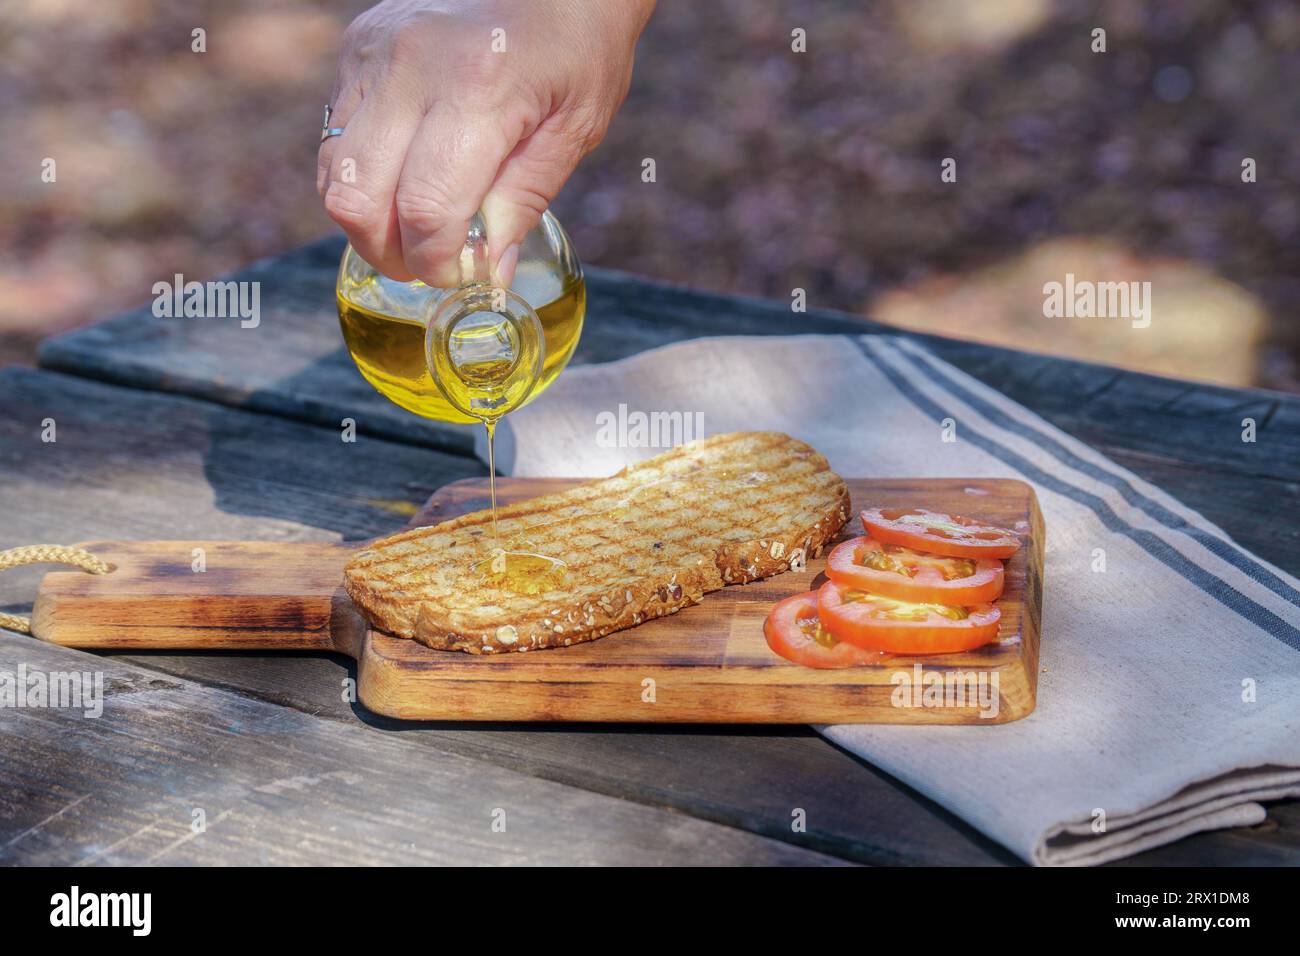 woman pours virgin olive oil on a toast of bread Stock Photo